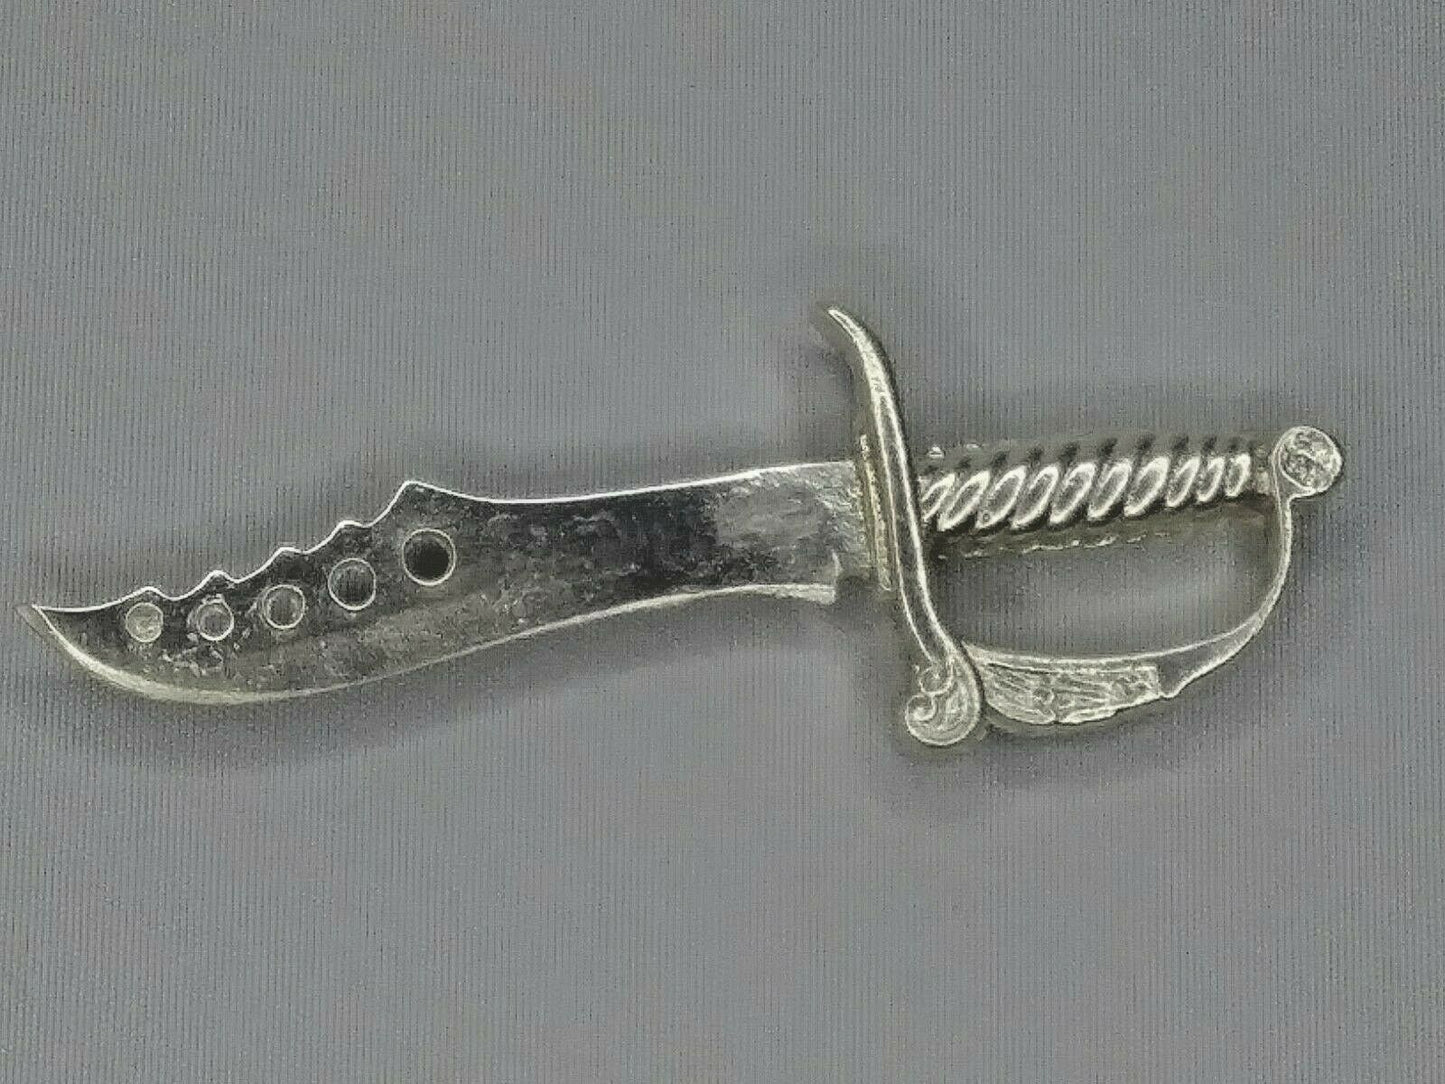 Knife Hand poured .999 fine Silver Bullion 3 3/4 long weight 30g  #4